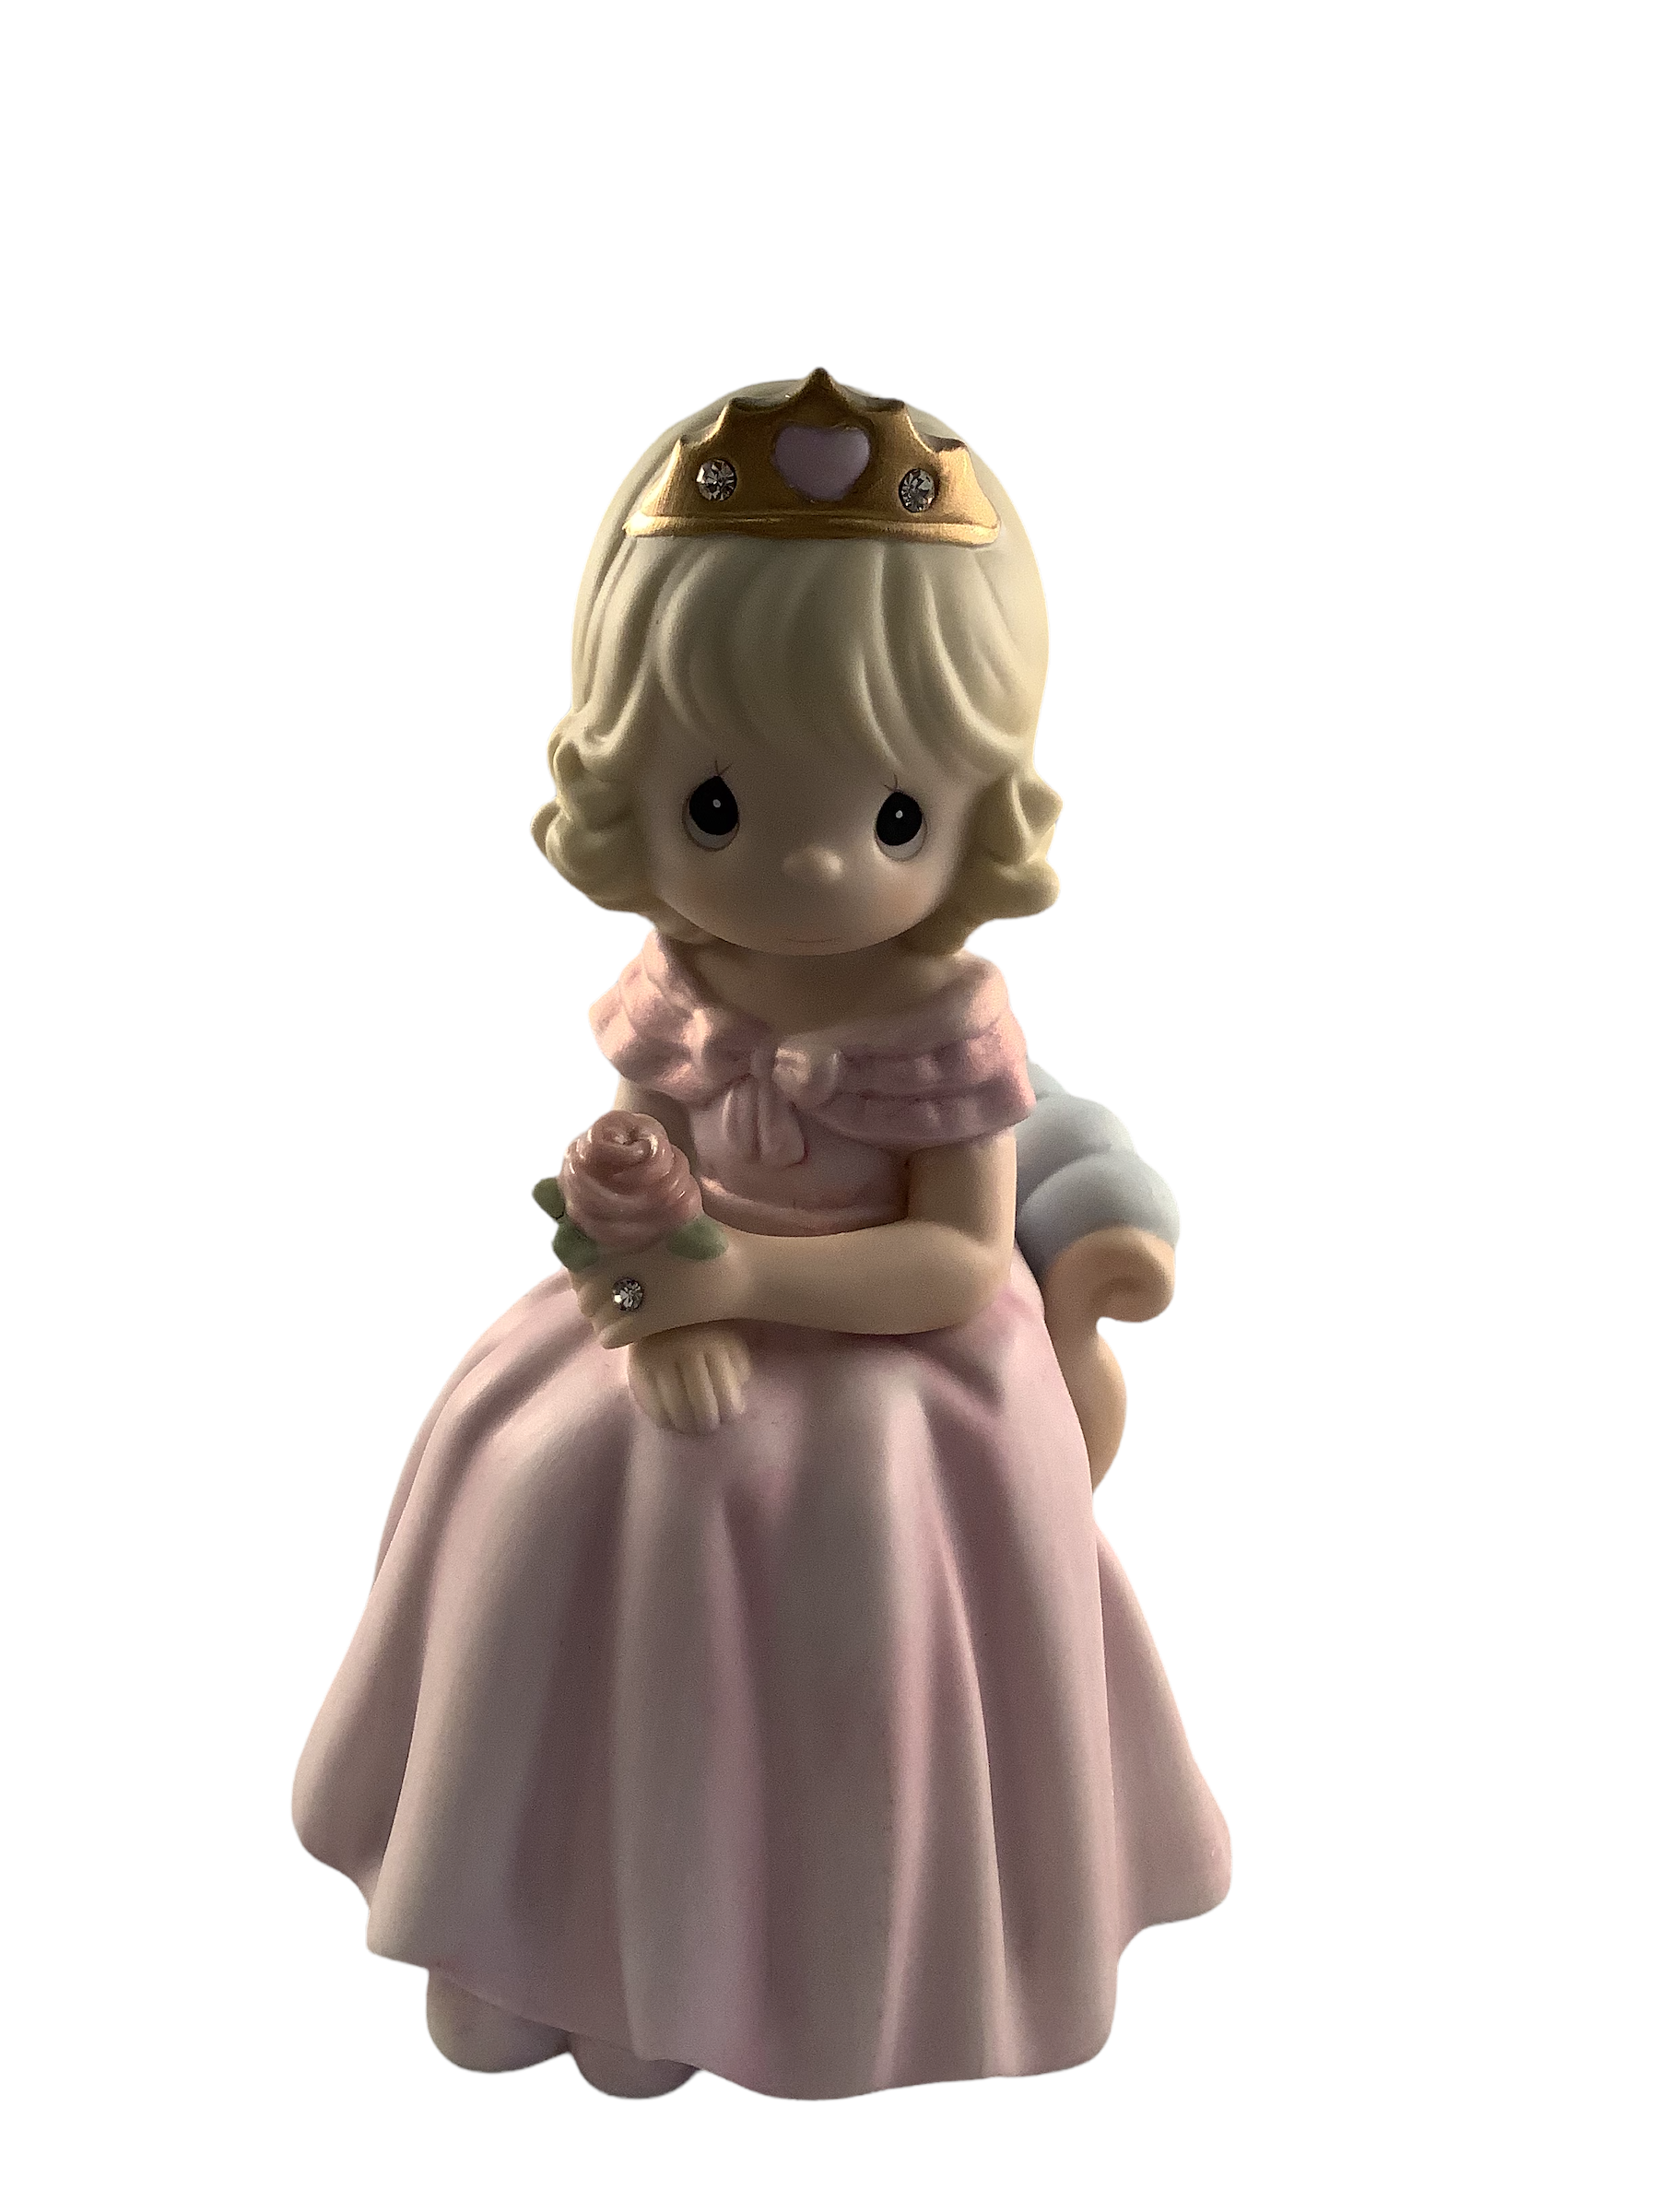 Your Love Reigns Forever In My Heart - Precious Moment Figurine